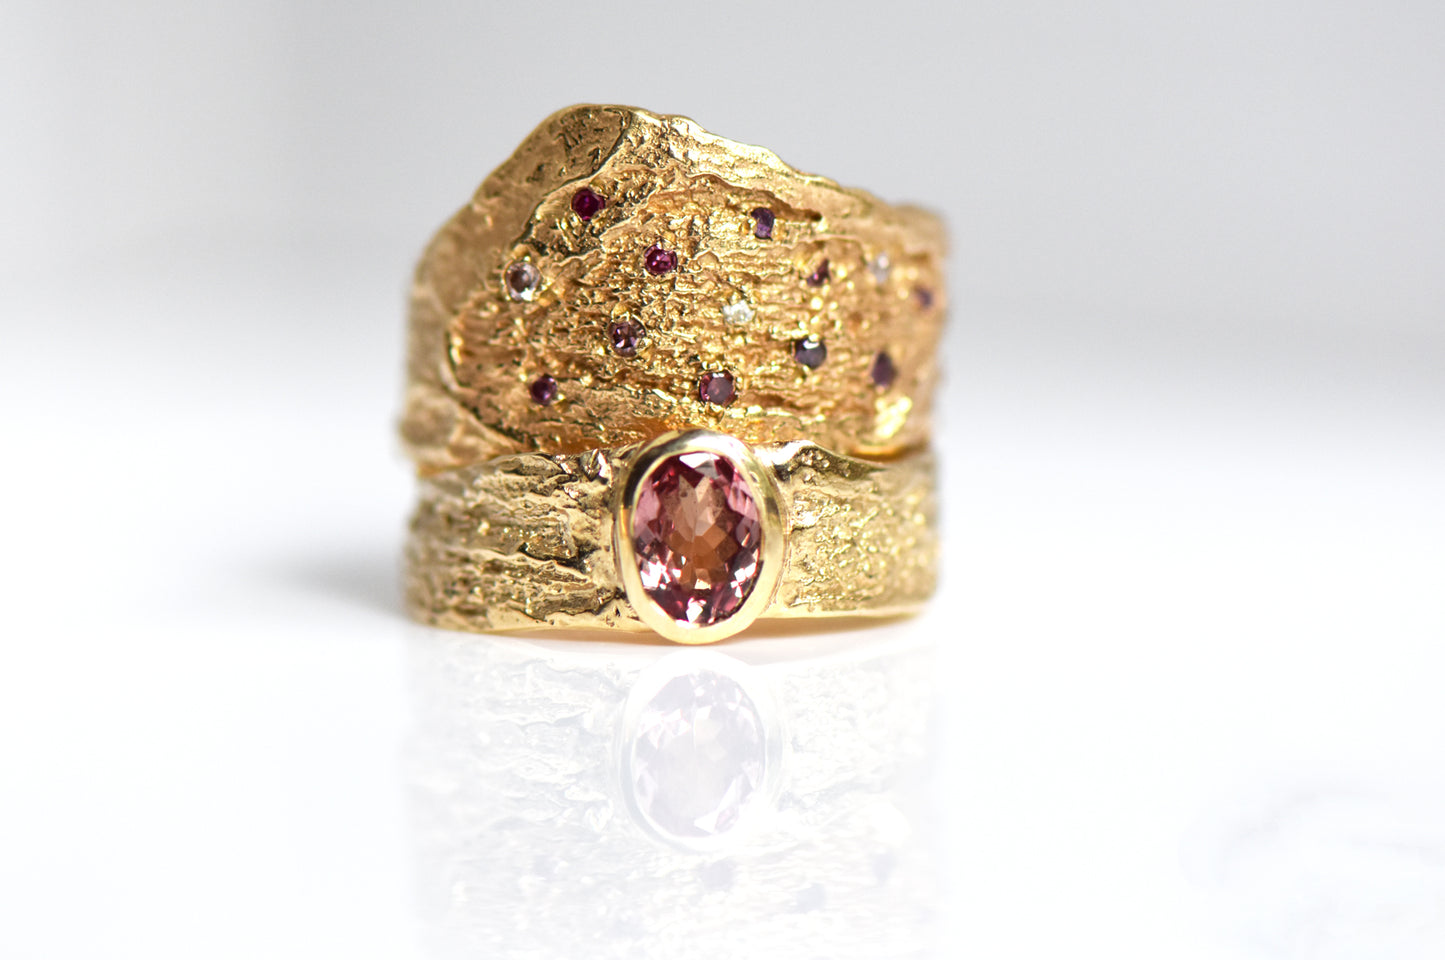 9ct Gold London Plane Ring with Pink Sapphire